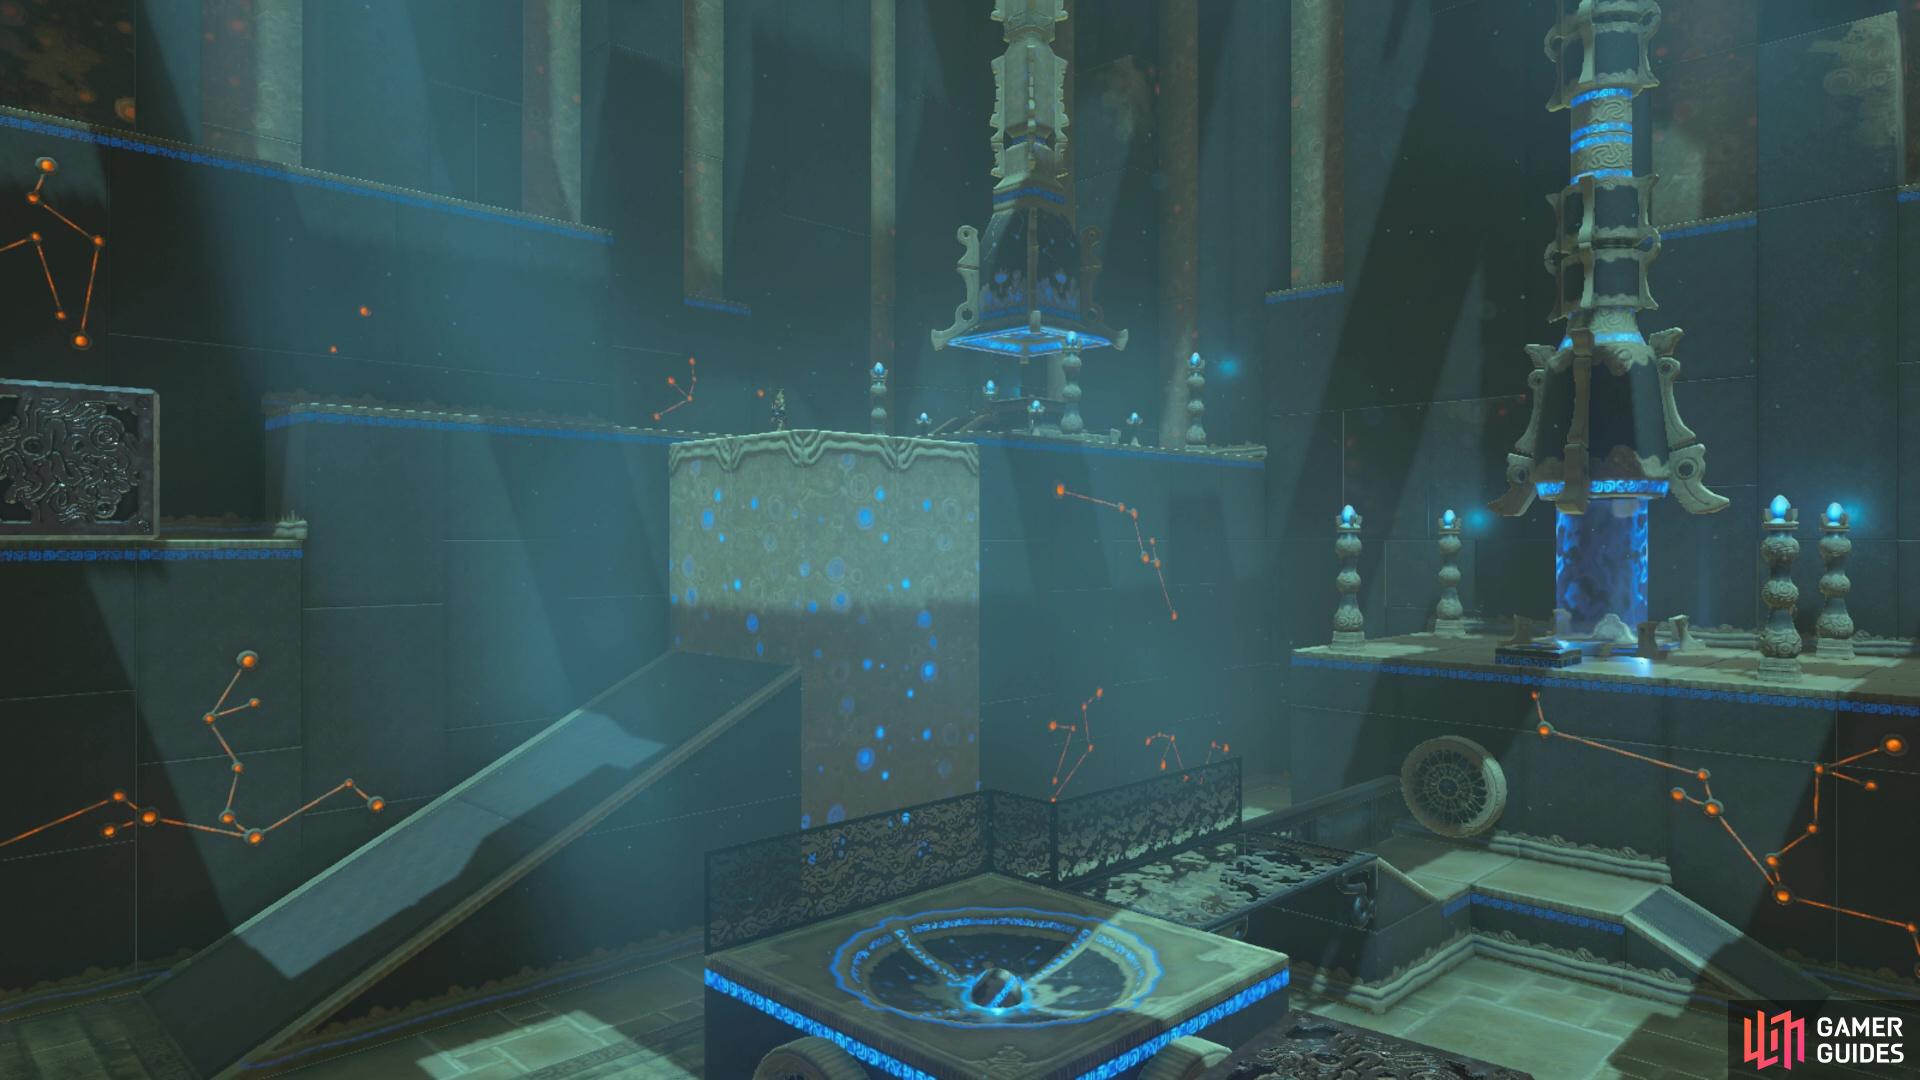 and once the ball is in the hole you'll be able to head to the end of the shrine.